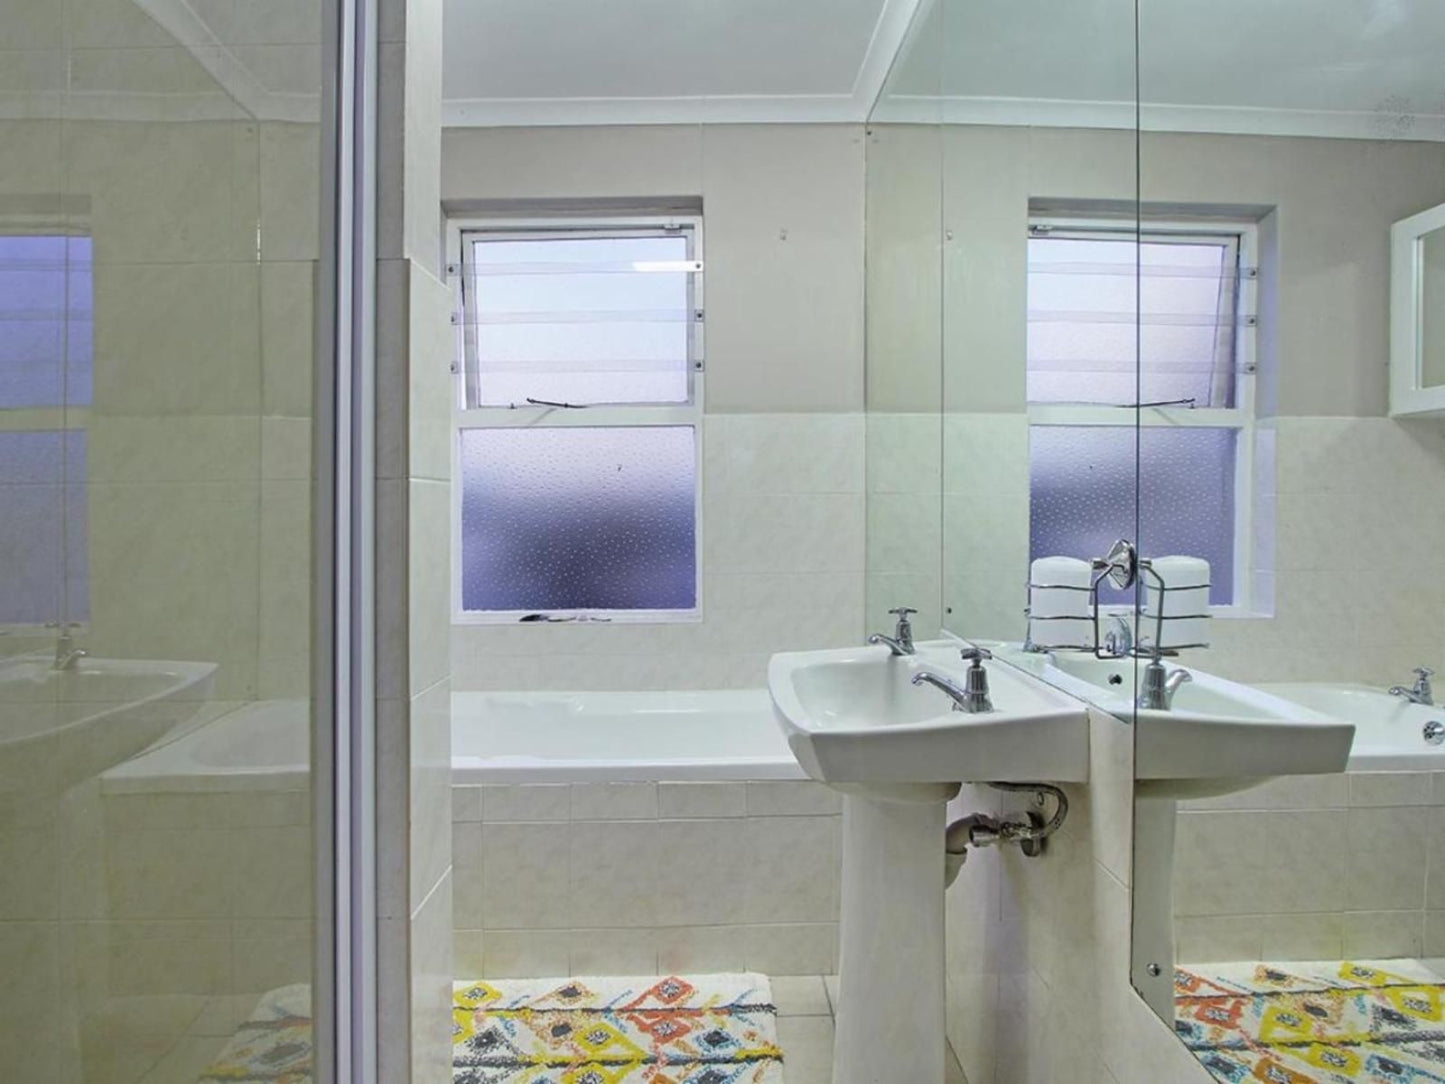 Marechale Way By Hostagents Woodbridge Island Cape Town Western Cape South Africa Unsaturated, Bathroom